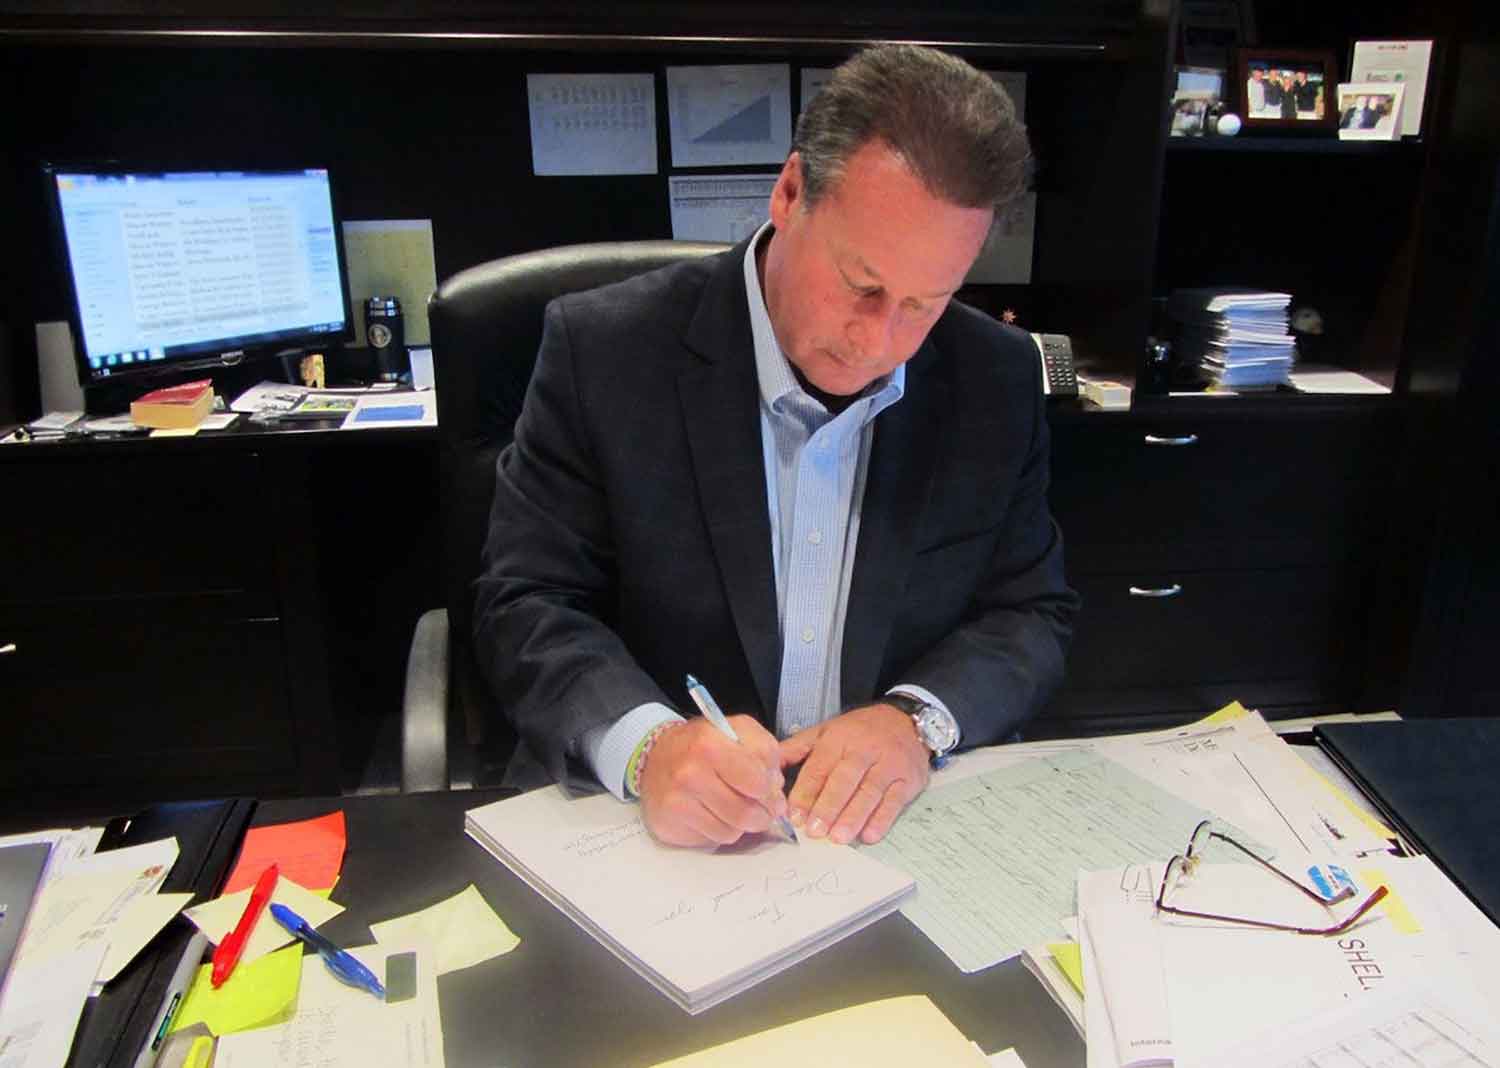 A CEO who writes 9,200 employee birthday cards a year explains the value of gratitude